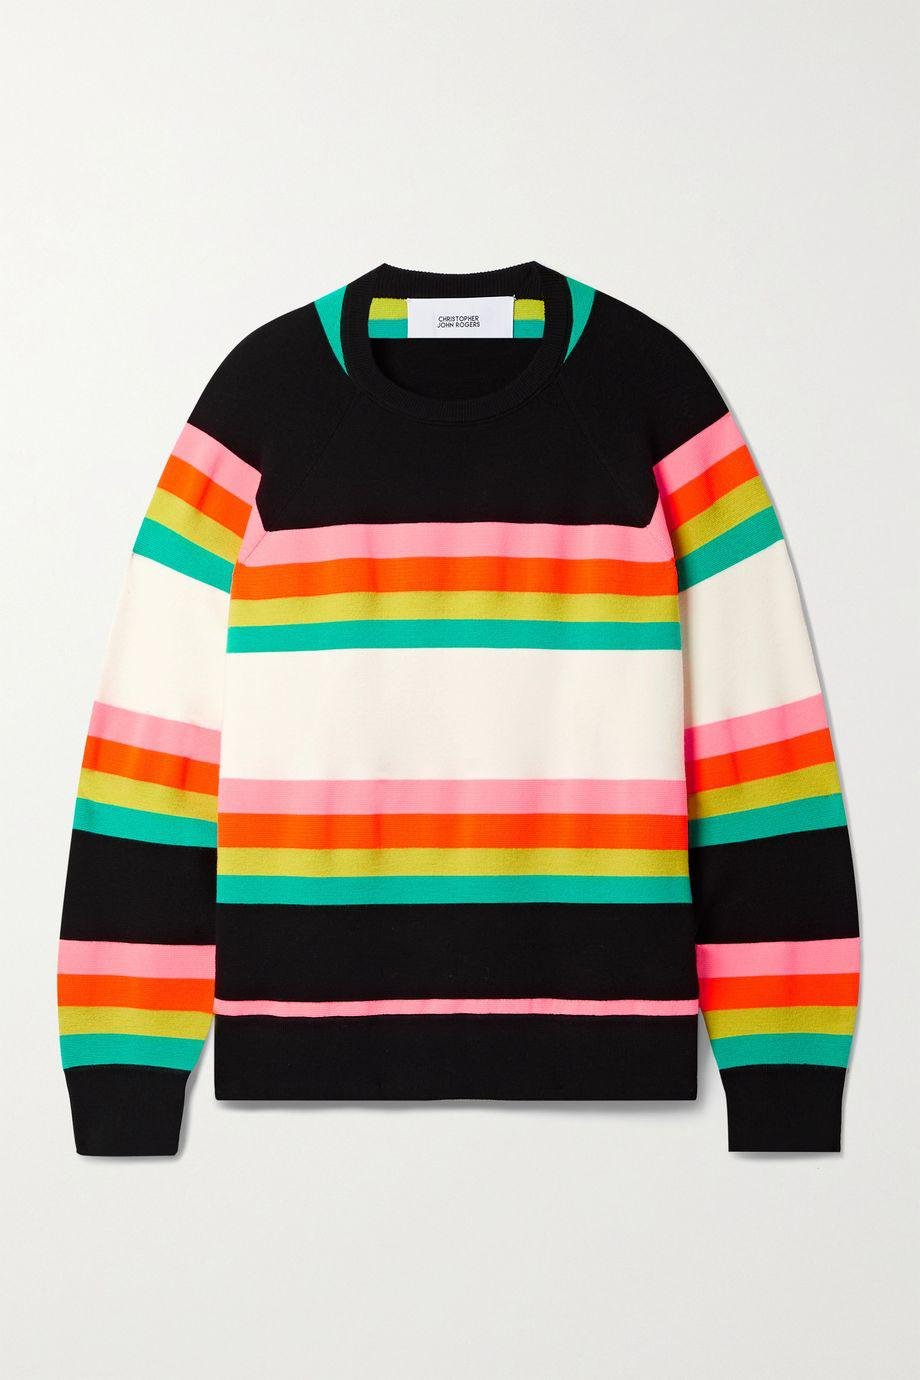 Striped jacquard-knit wool-blend sweater by CHRISTOPHER JOHN ROGERS